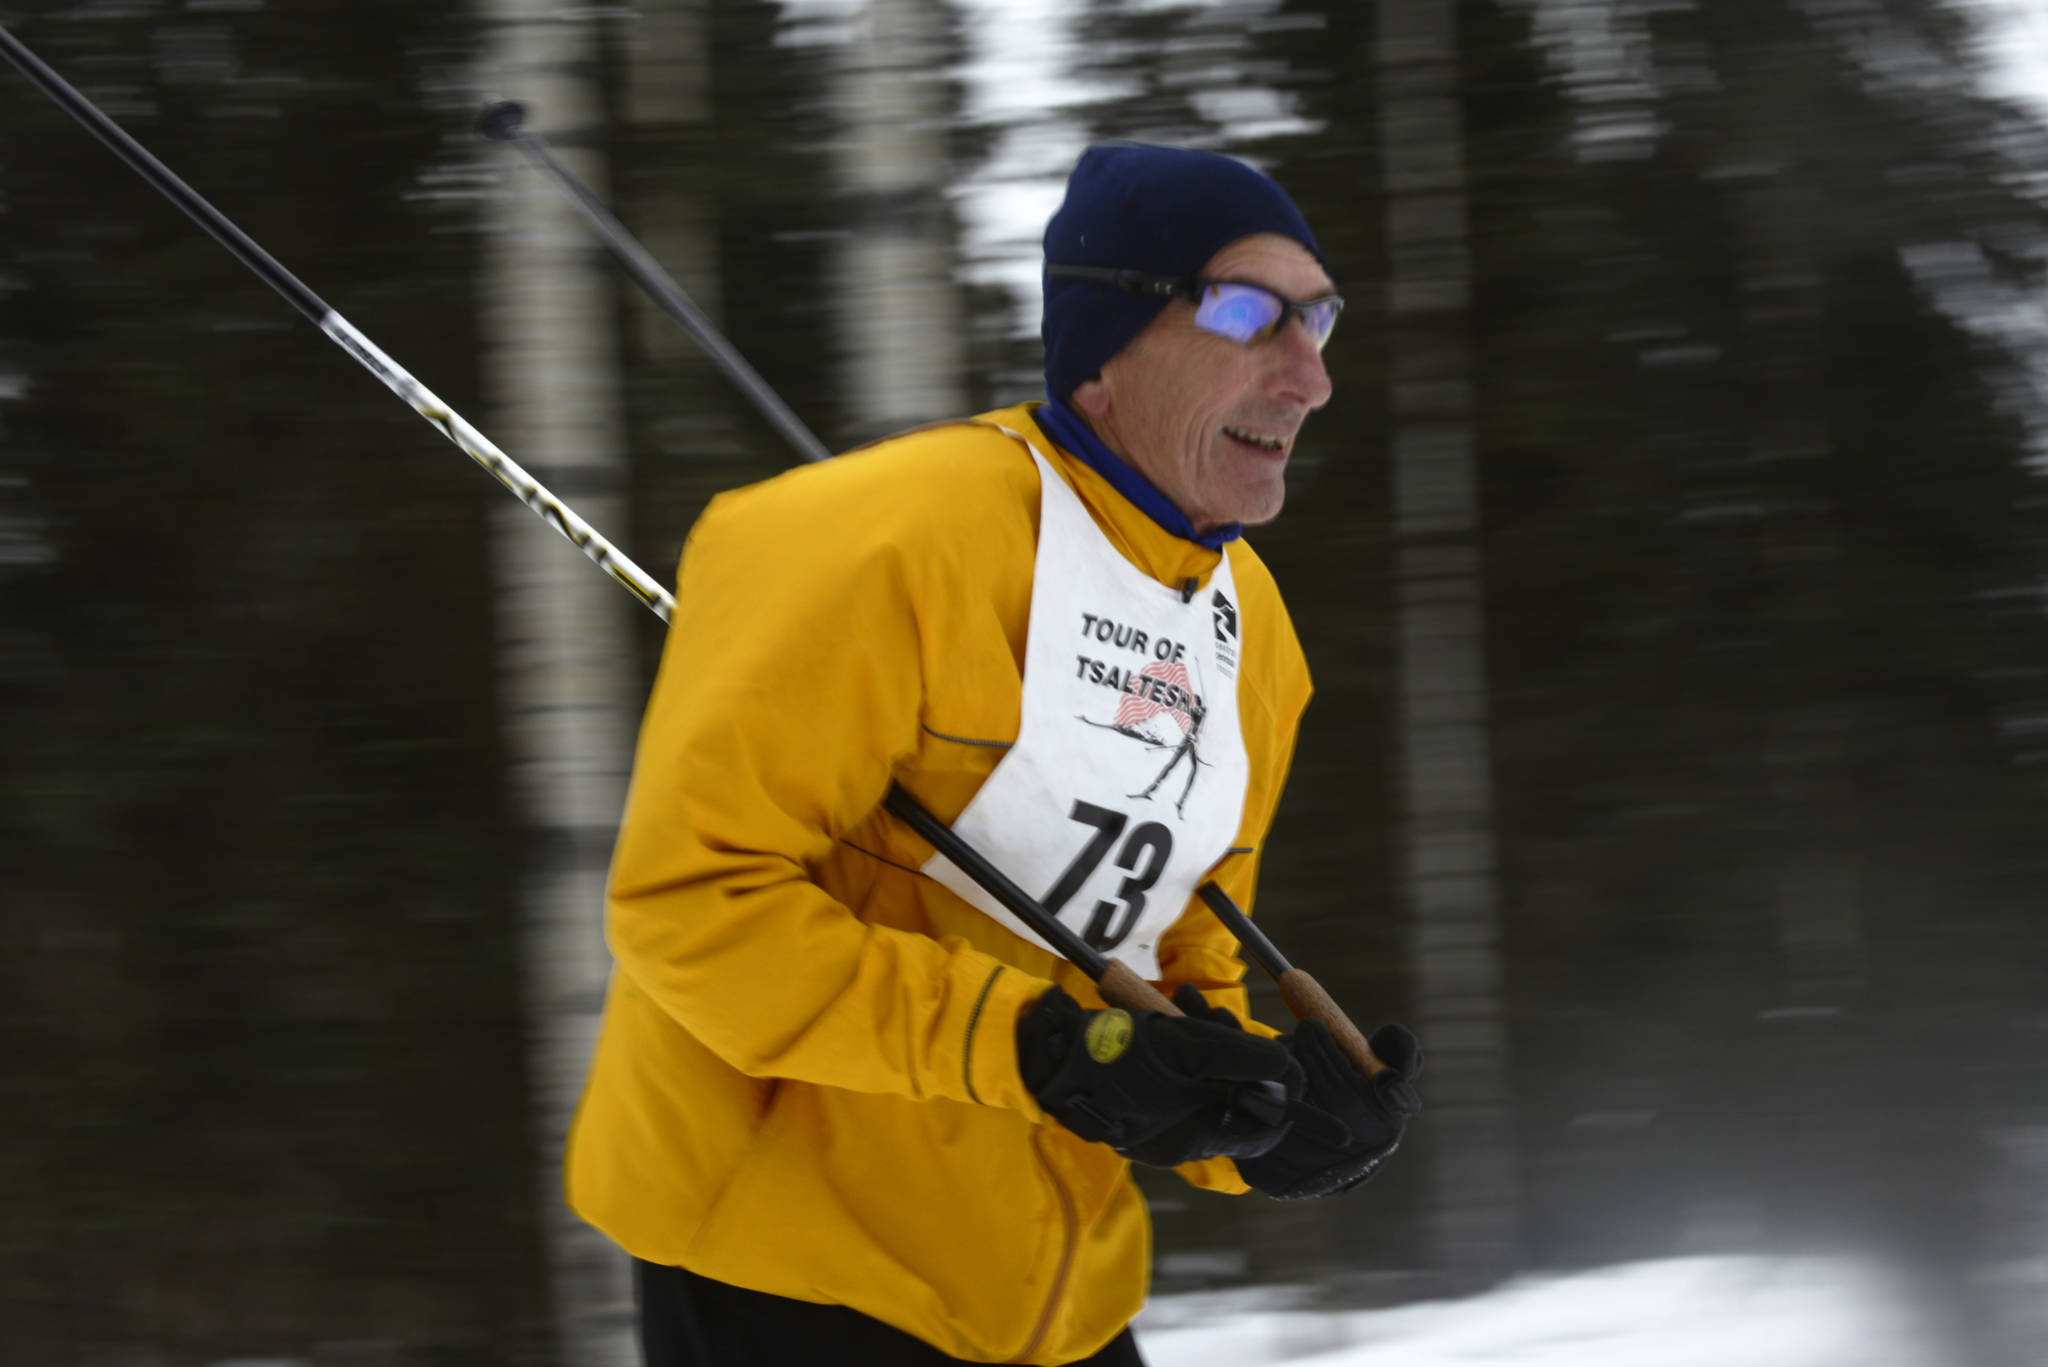 Skier Pete Sprague participates in the first annual Tour of Tsalteshi ski race on Sunday, Feb. 18, 2018.